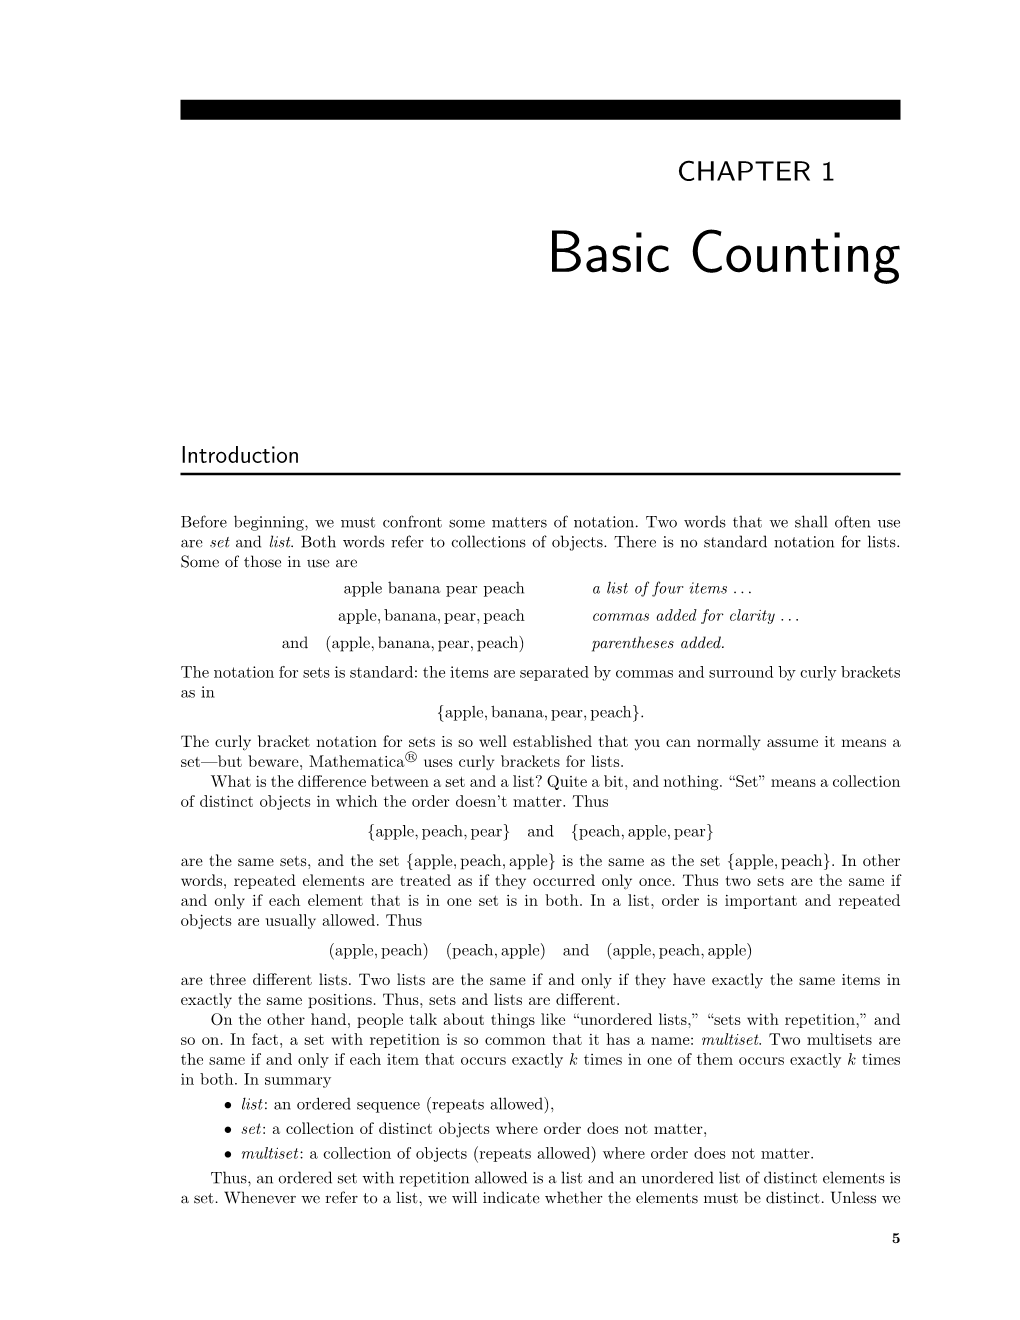 Basic Counting